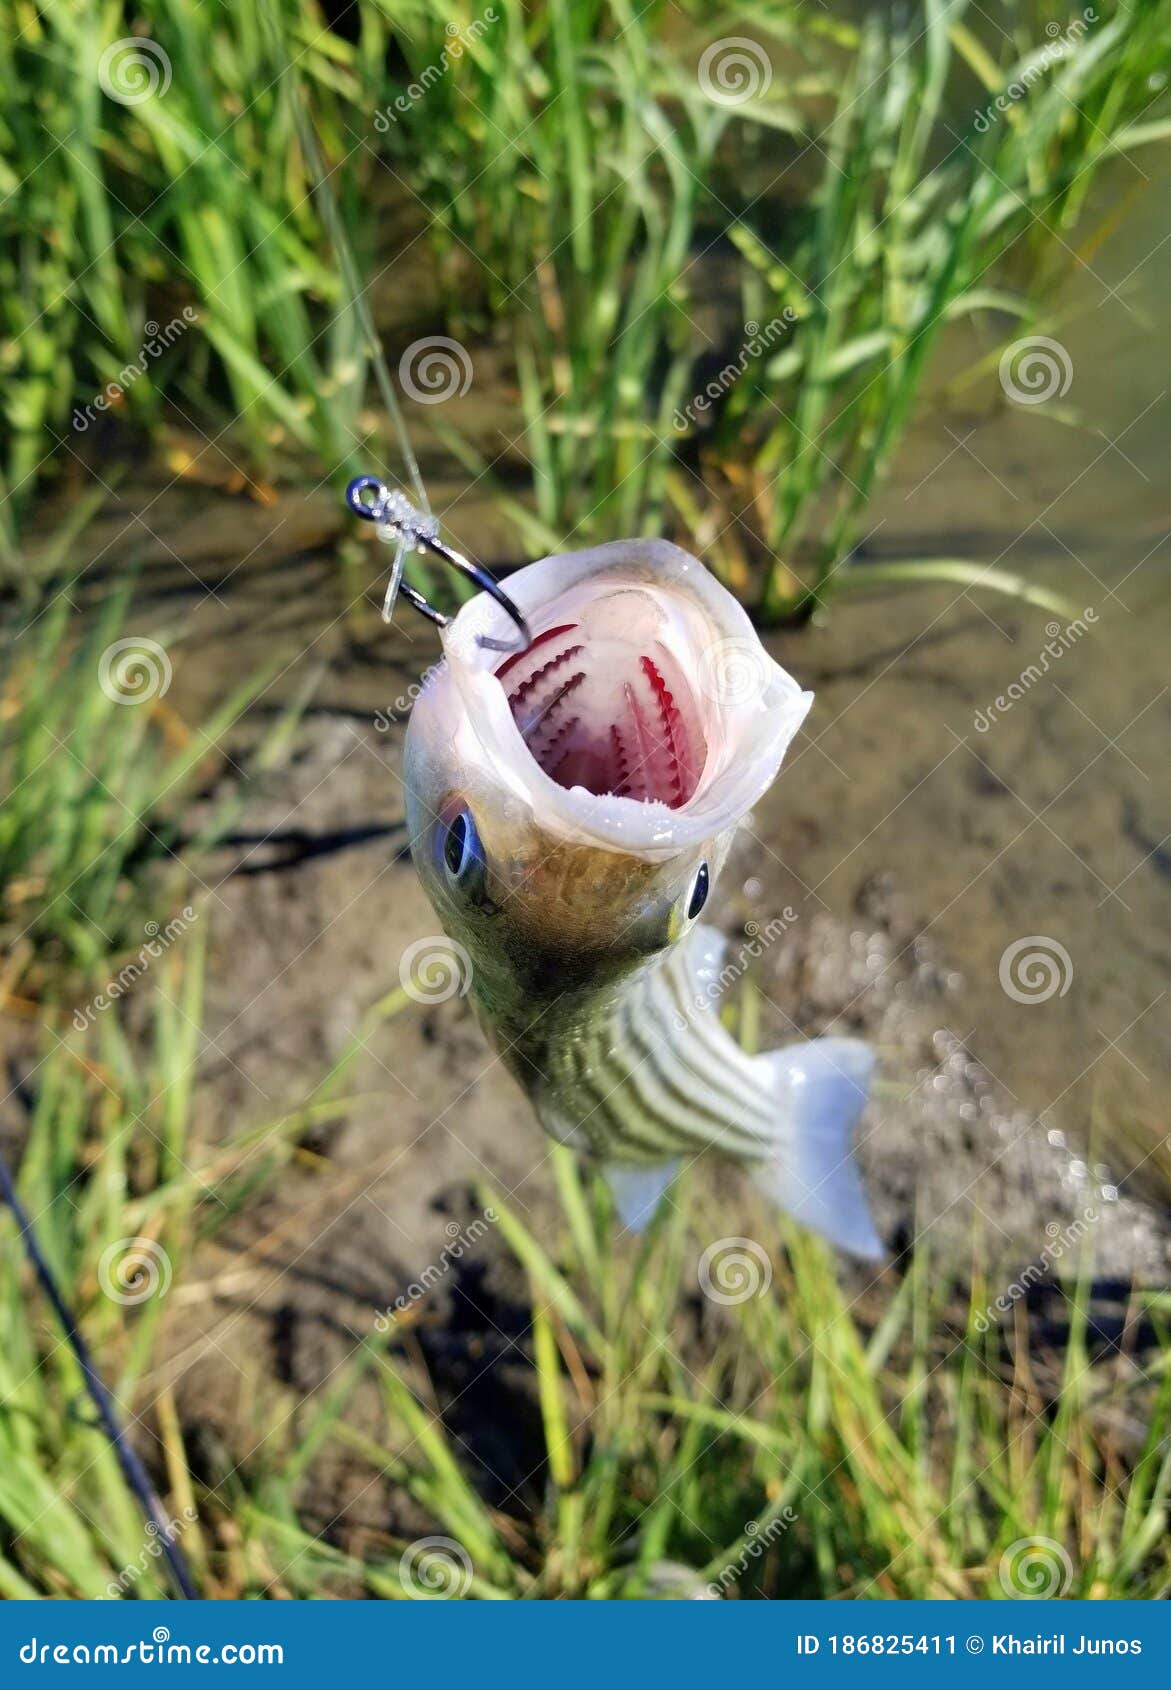 https://thumbs.dreamstime.com/z/inside-mouth-small-striped-bass-hanging-fishing-line-hook-inside-mouth-small-striped-bass-hanging-186825411.jpg